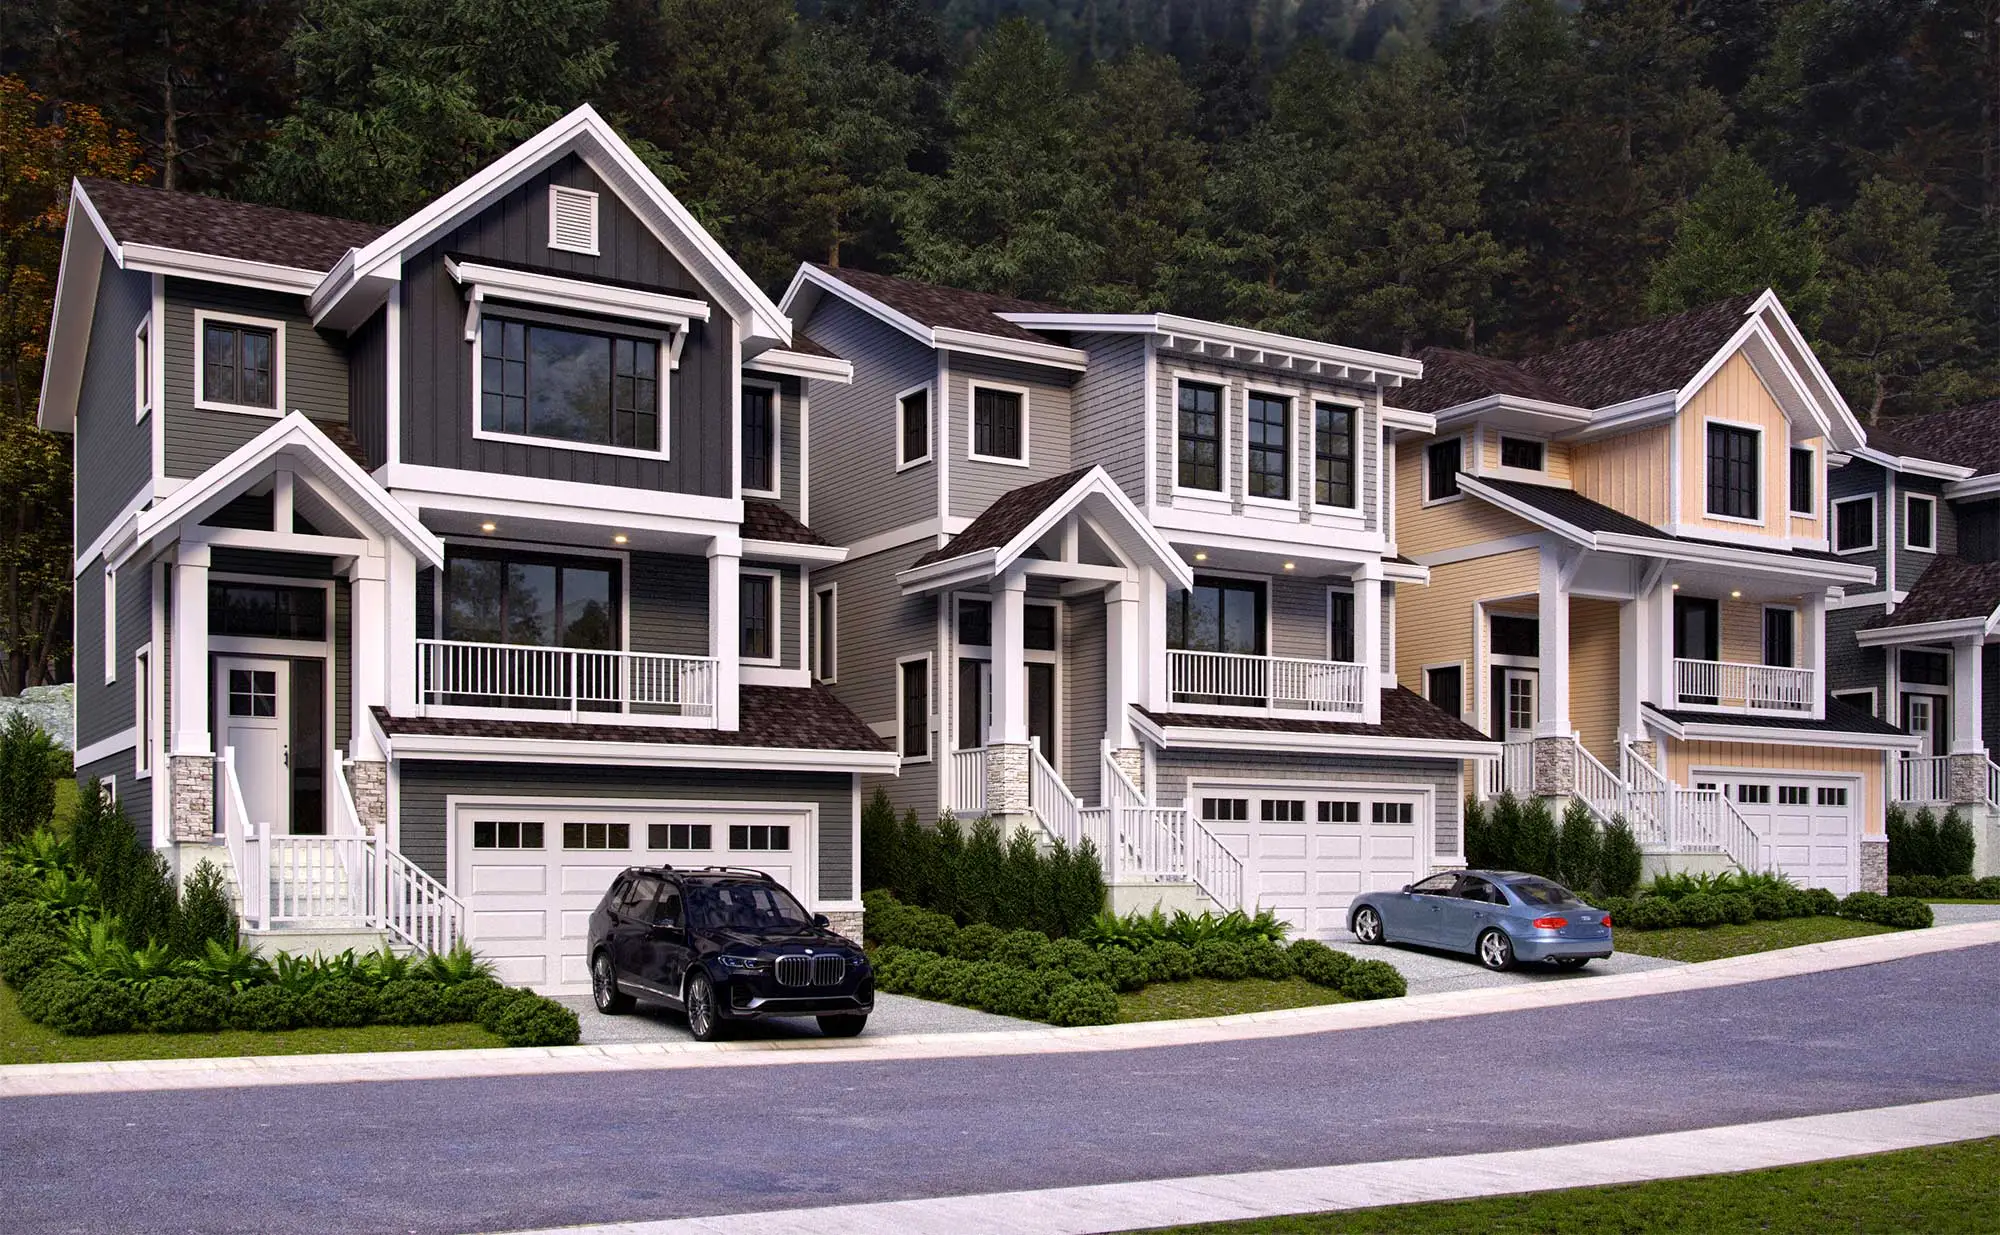 Nature's Edge by Citadel Properties is an East Abbotsford detached home and townhome development.